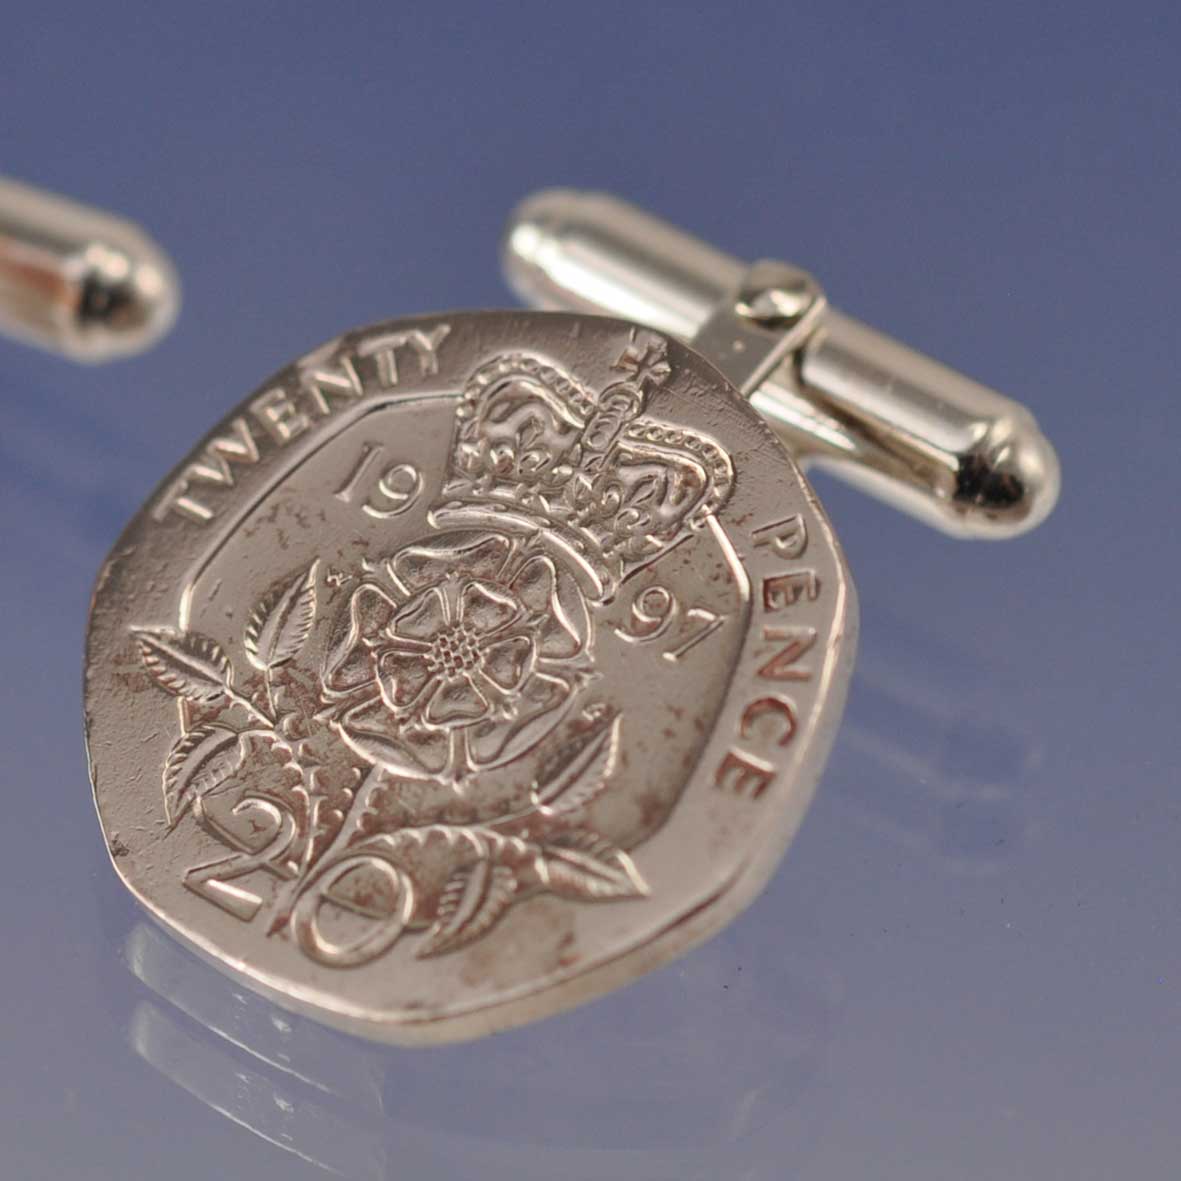 Your Special Date Coins into Cufflinks Cufflinks by Chris Parry Jewellery